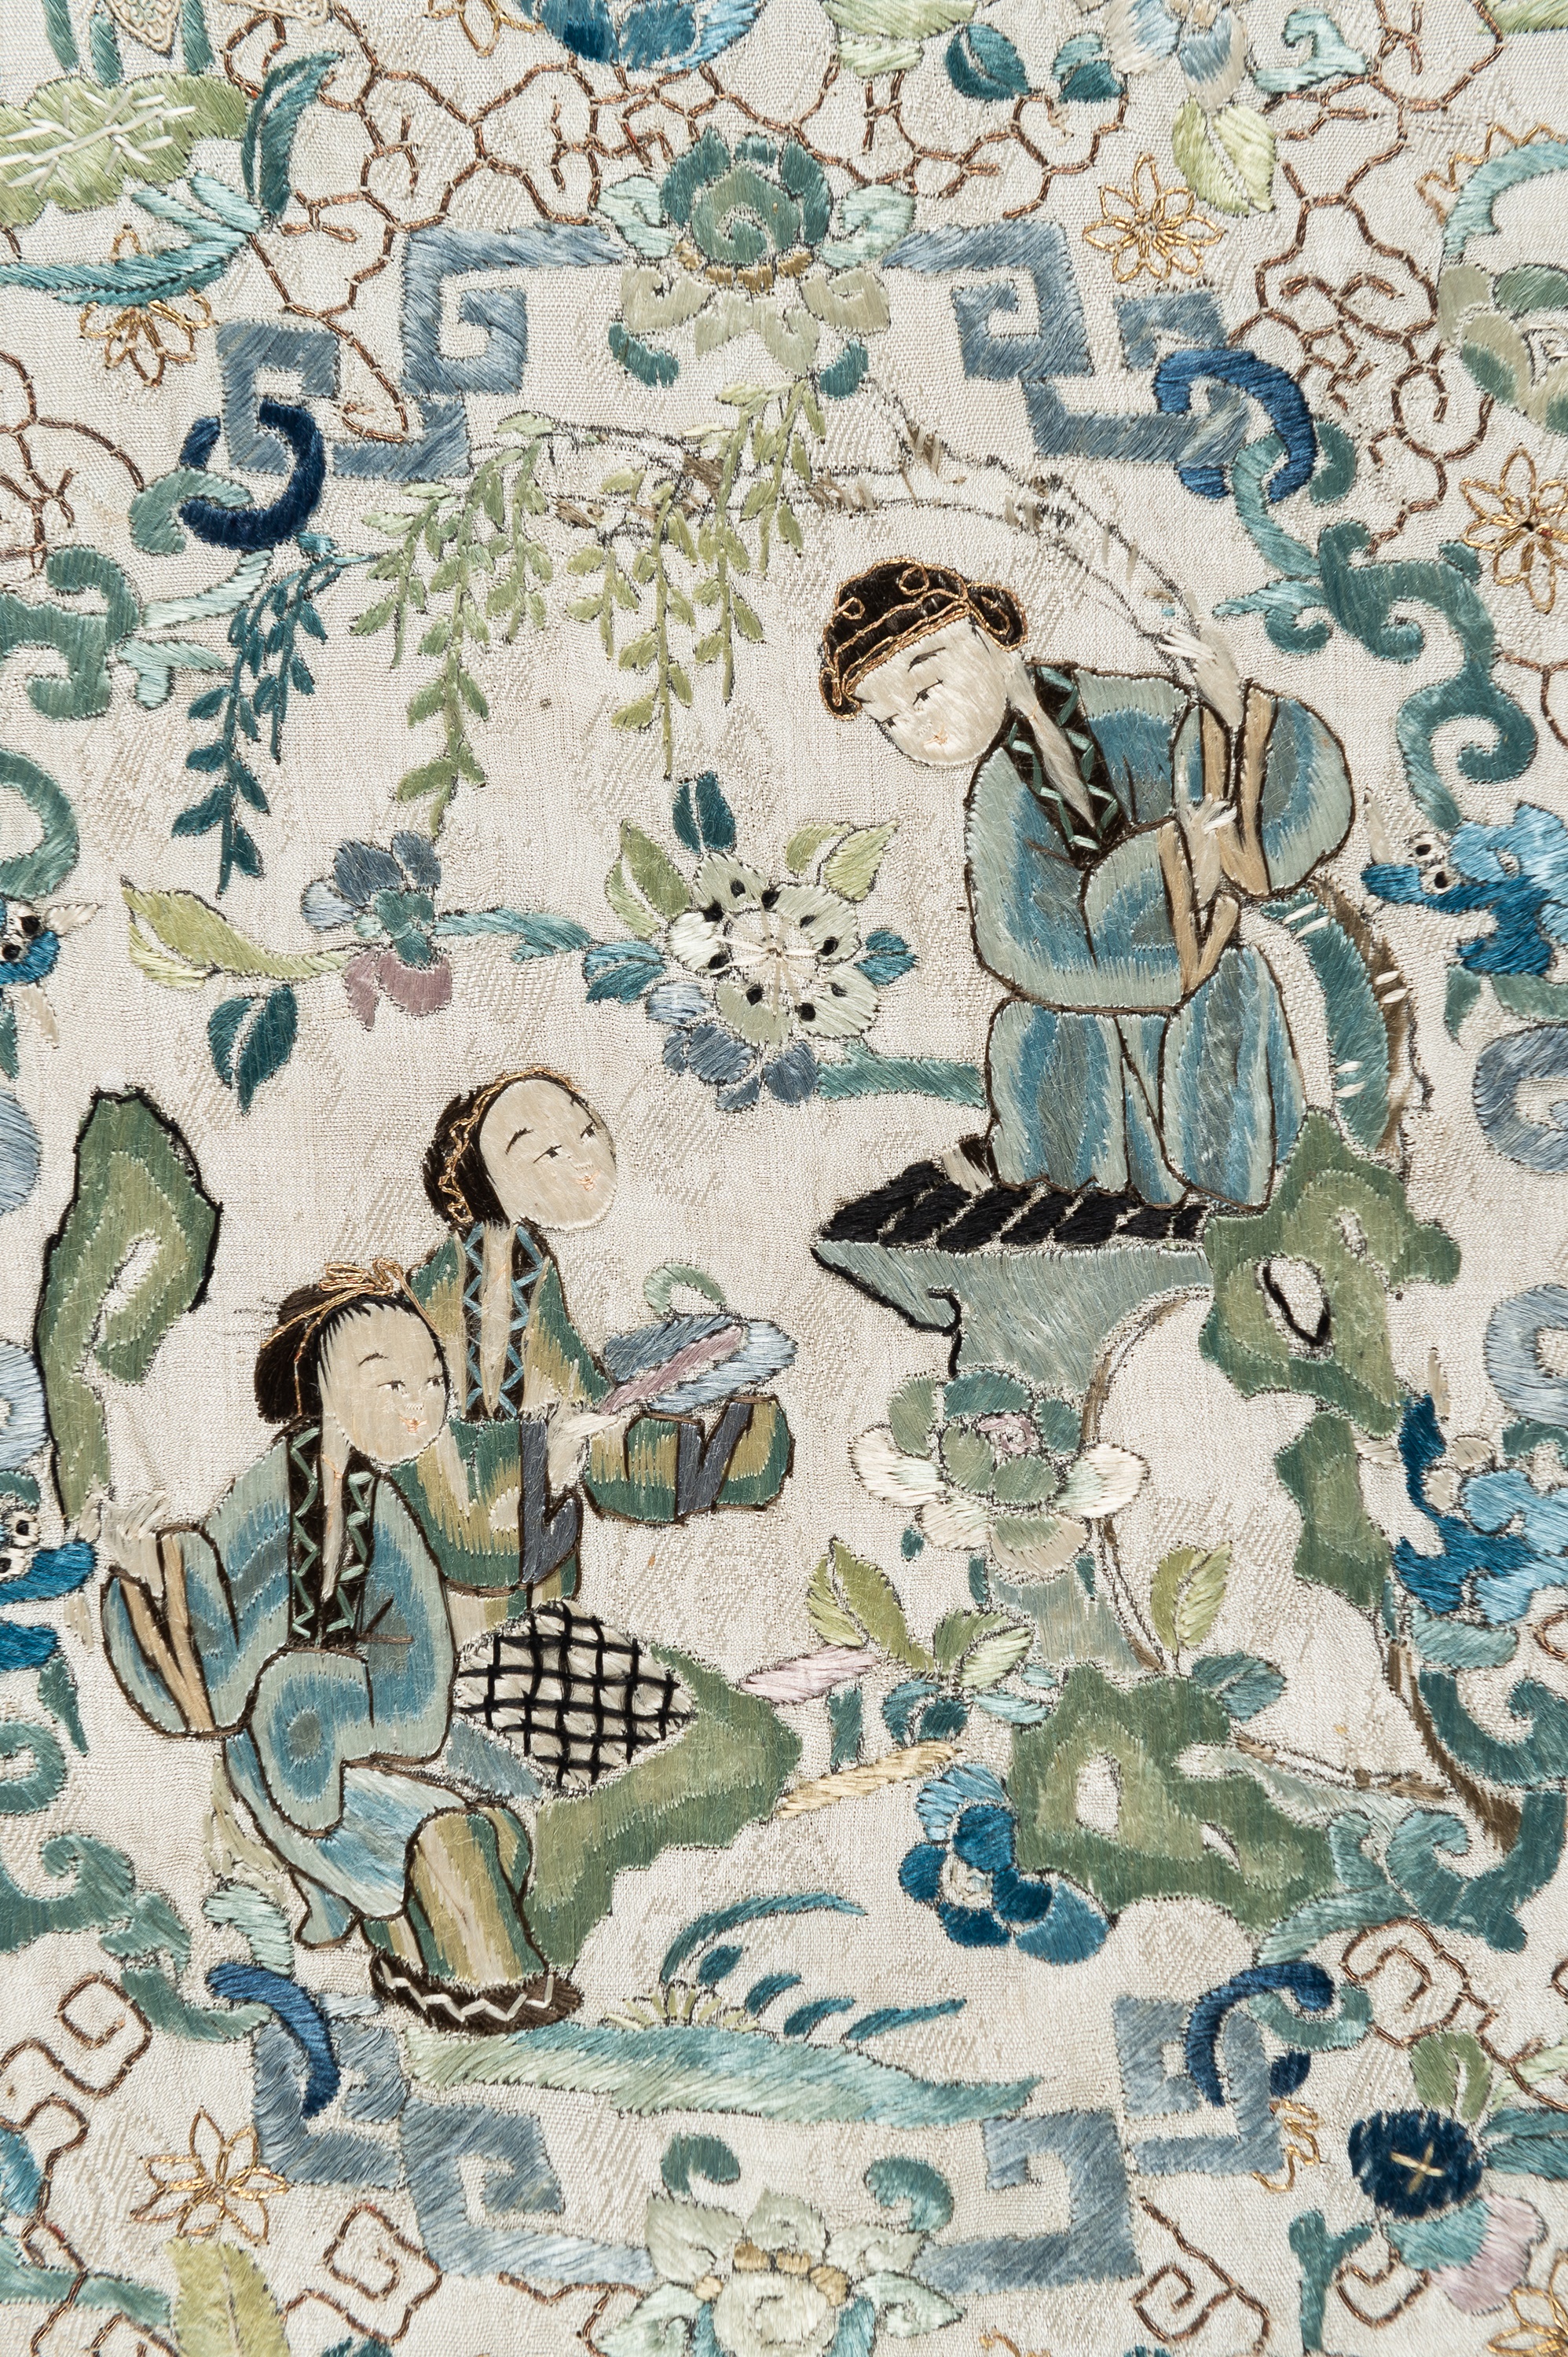 A SILK EMBROIDERY WITH COURT LADIES, QING - Image 4 of 9